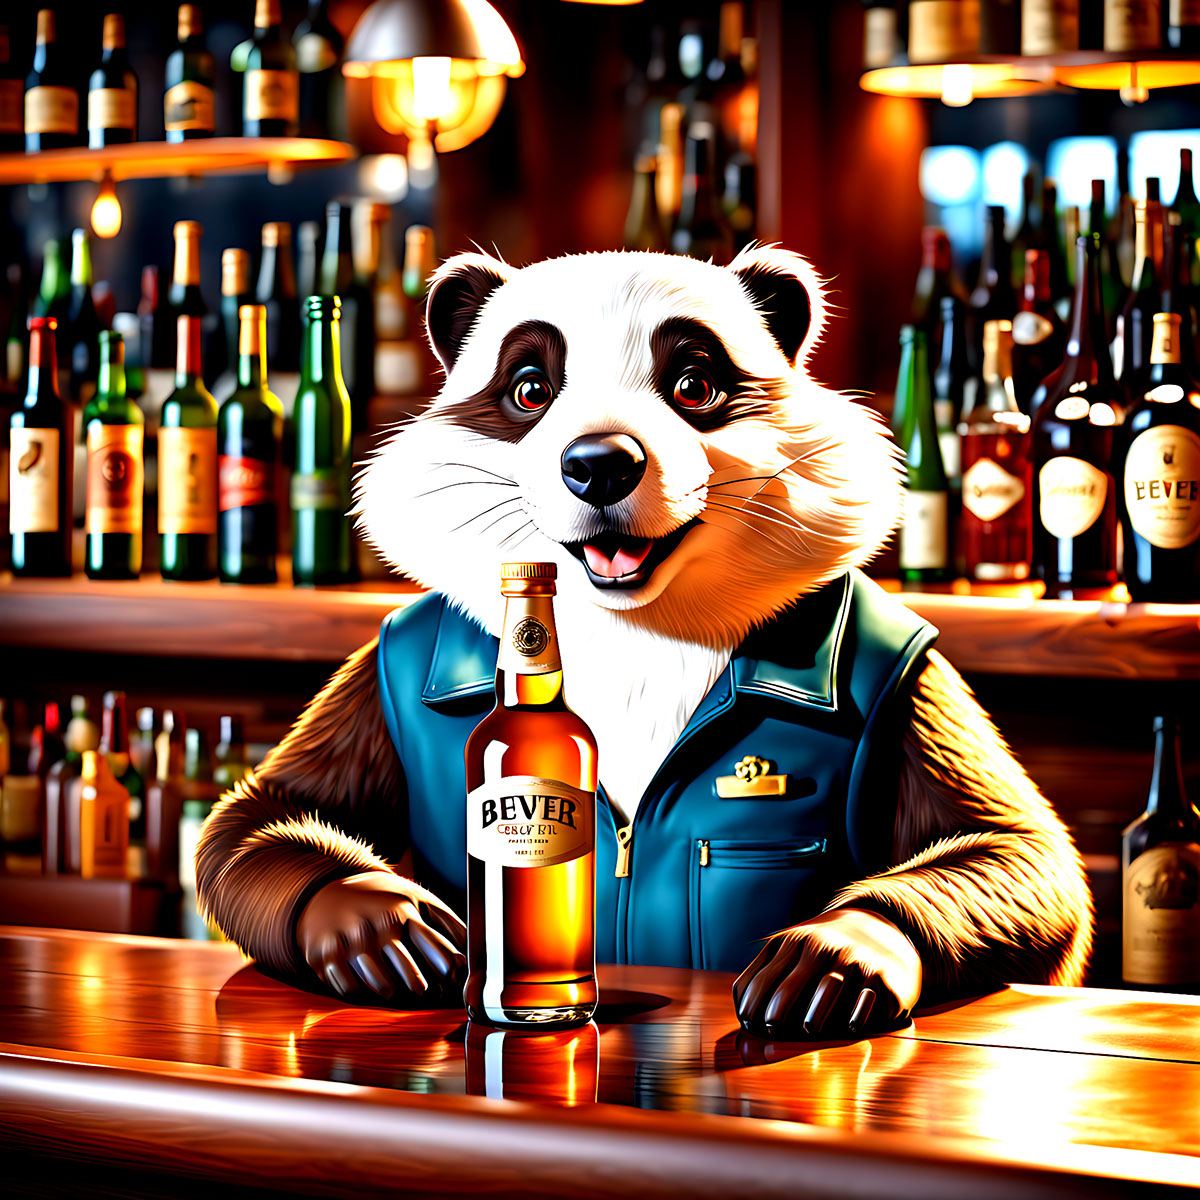 Bever in a bar rendition image